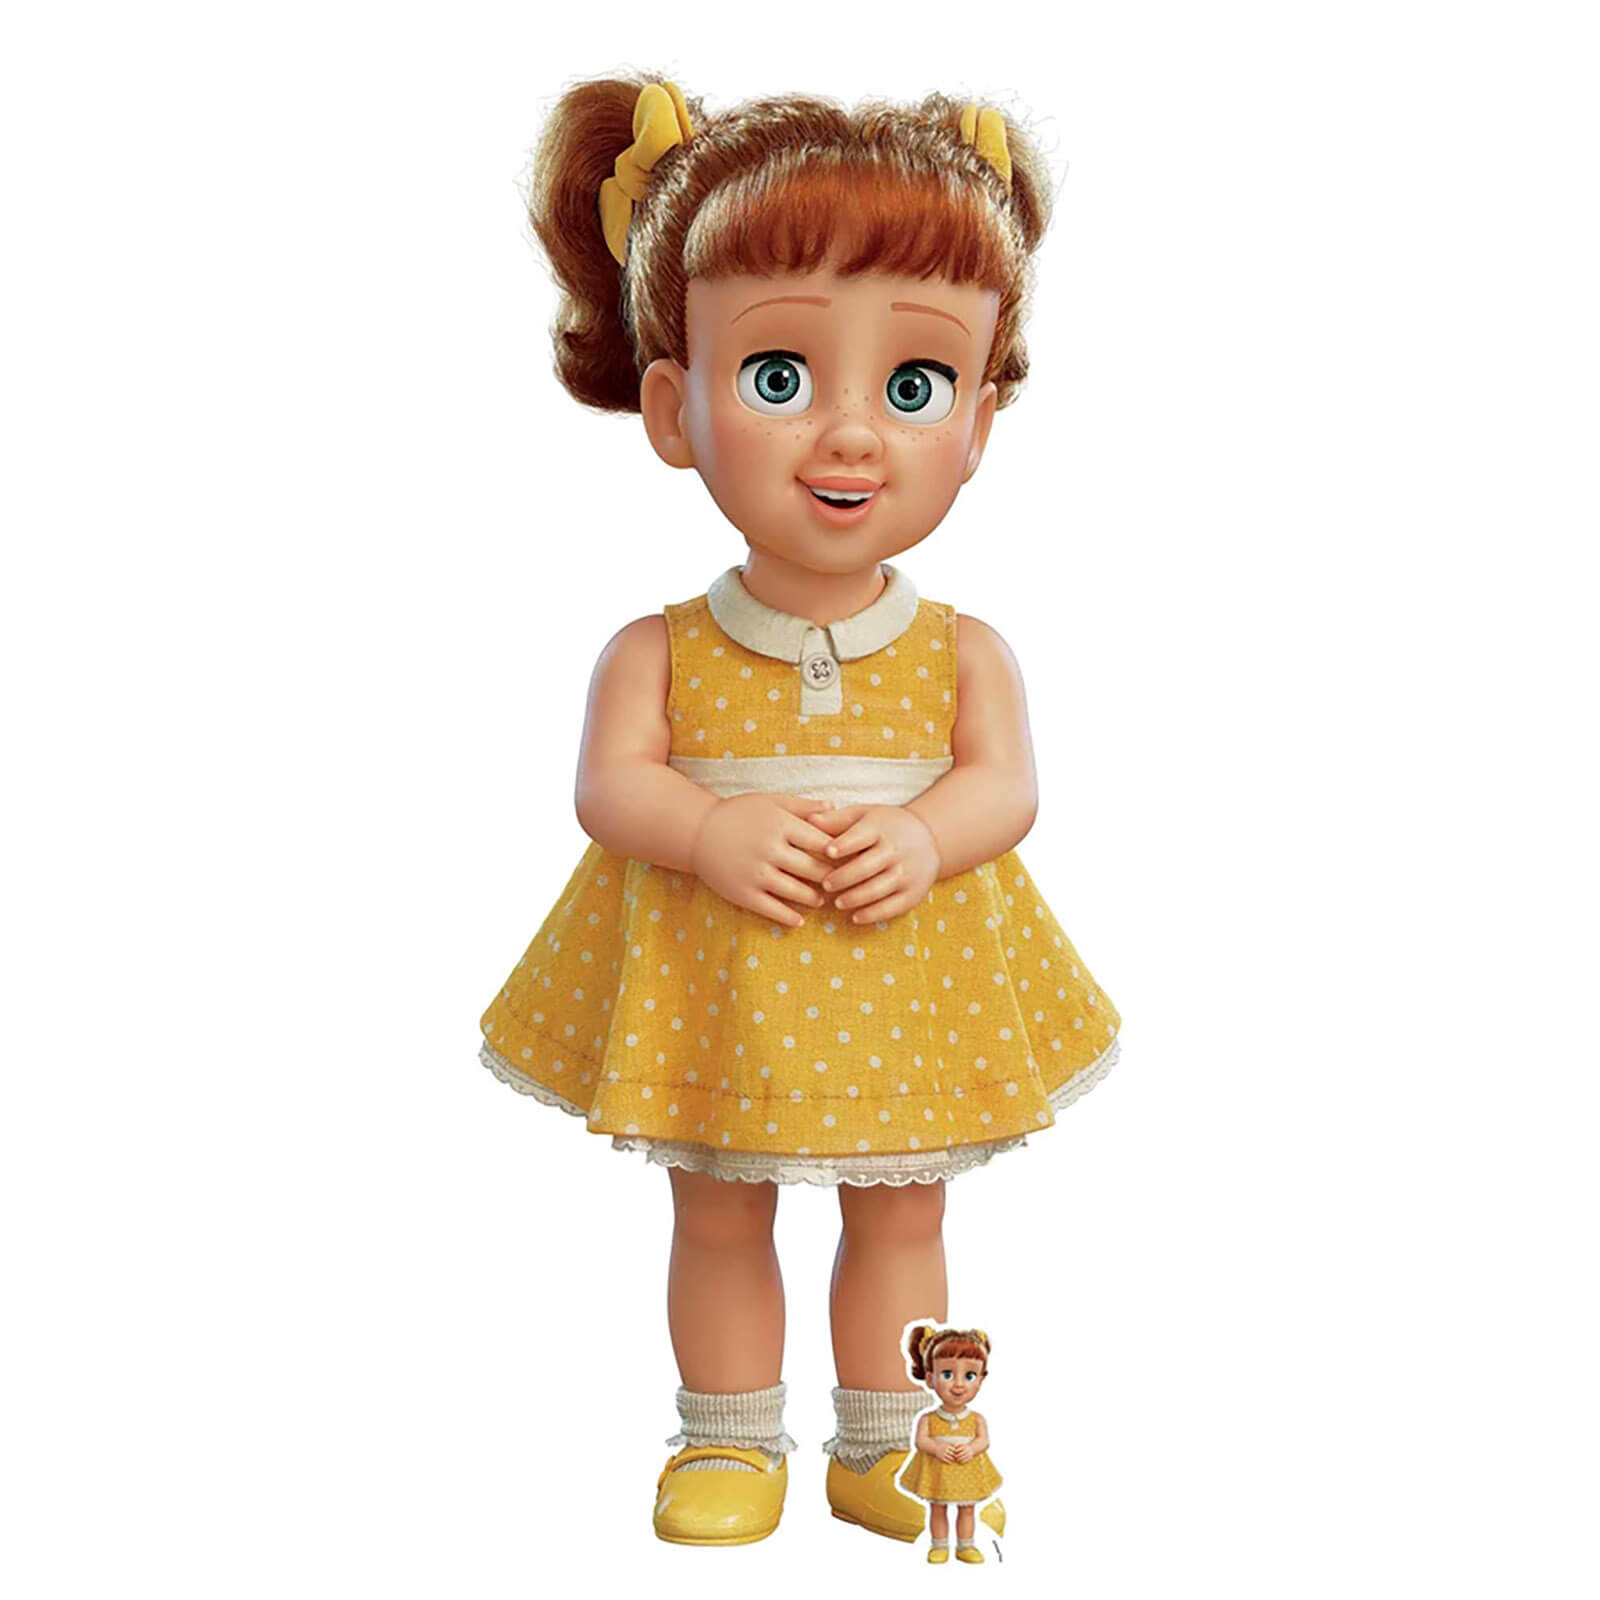 Star Cutouts Toy Story 4 Gabby Gabby Doll Yellow Dress Cut Out